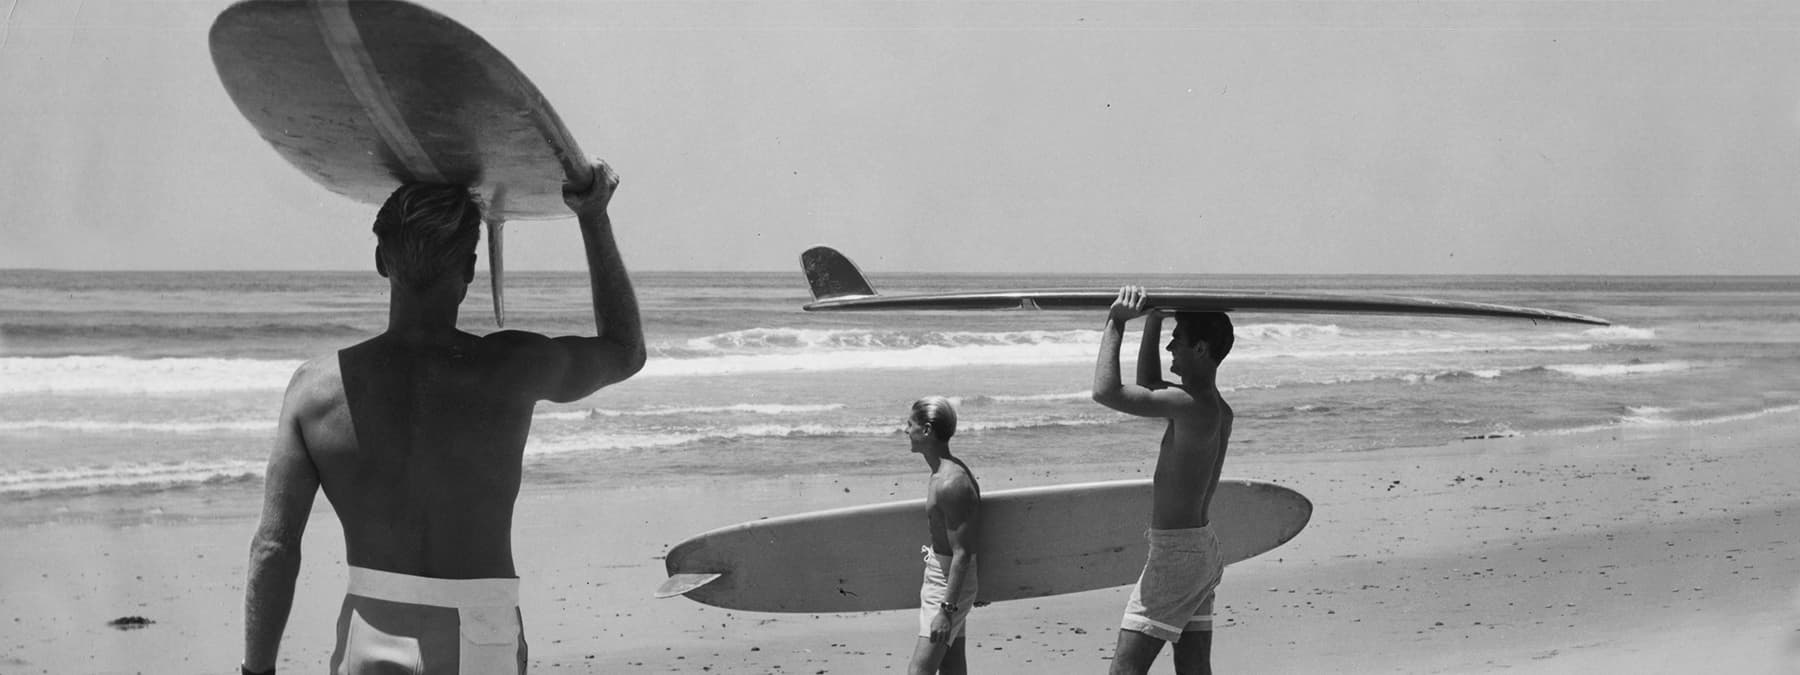 robert august and friends holding longboard surfboards